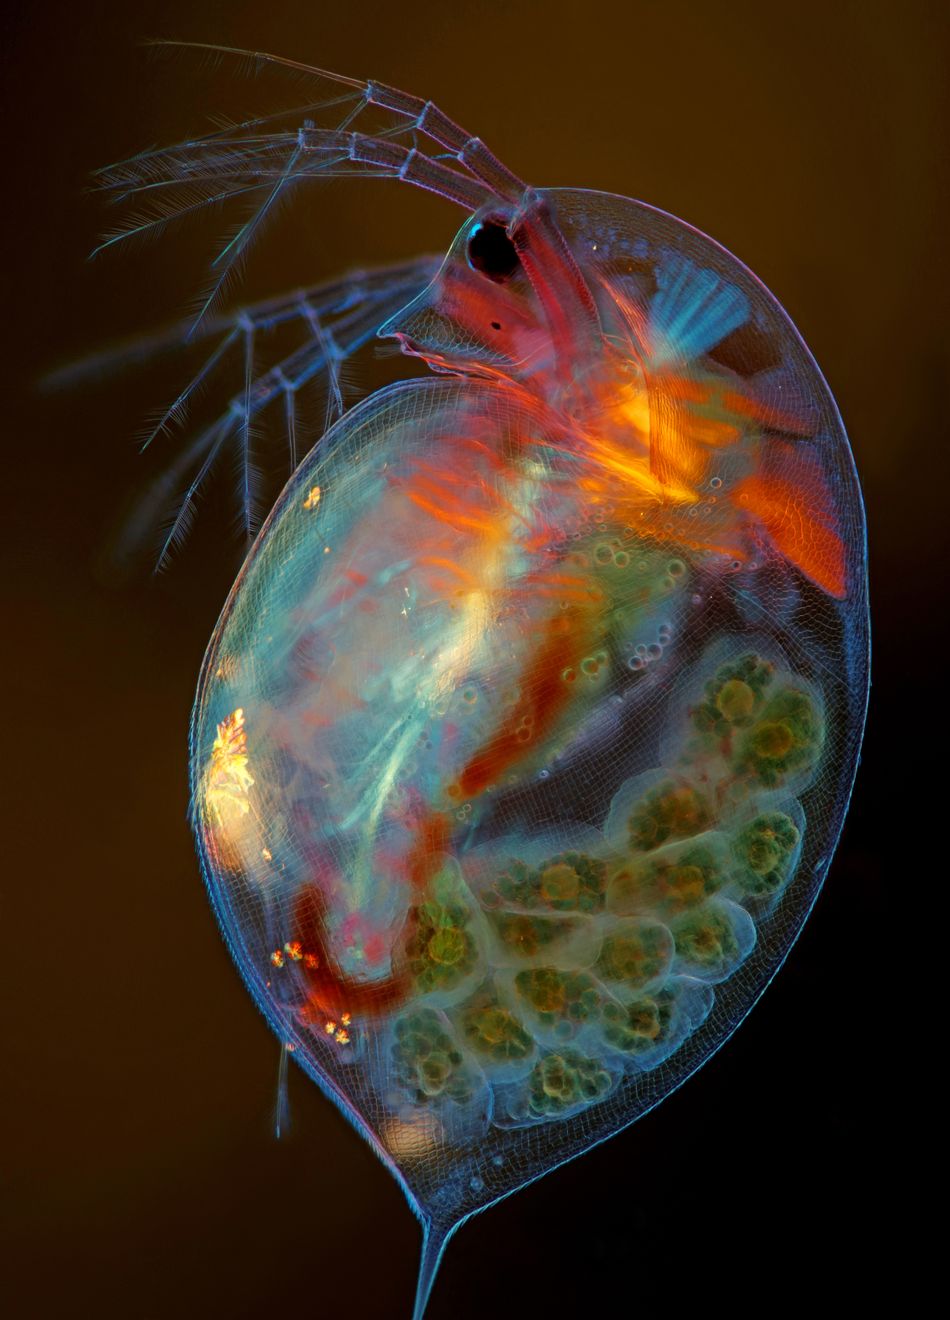 This small planktonic crustacean is pregnant.